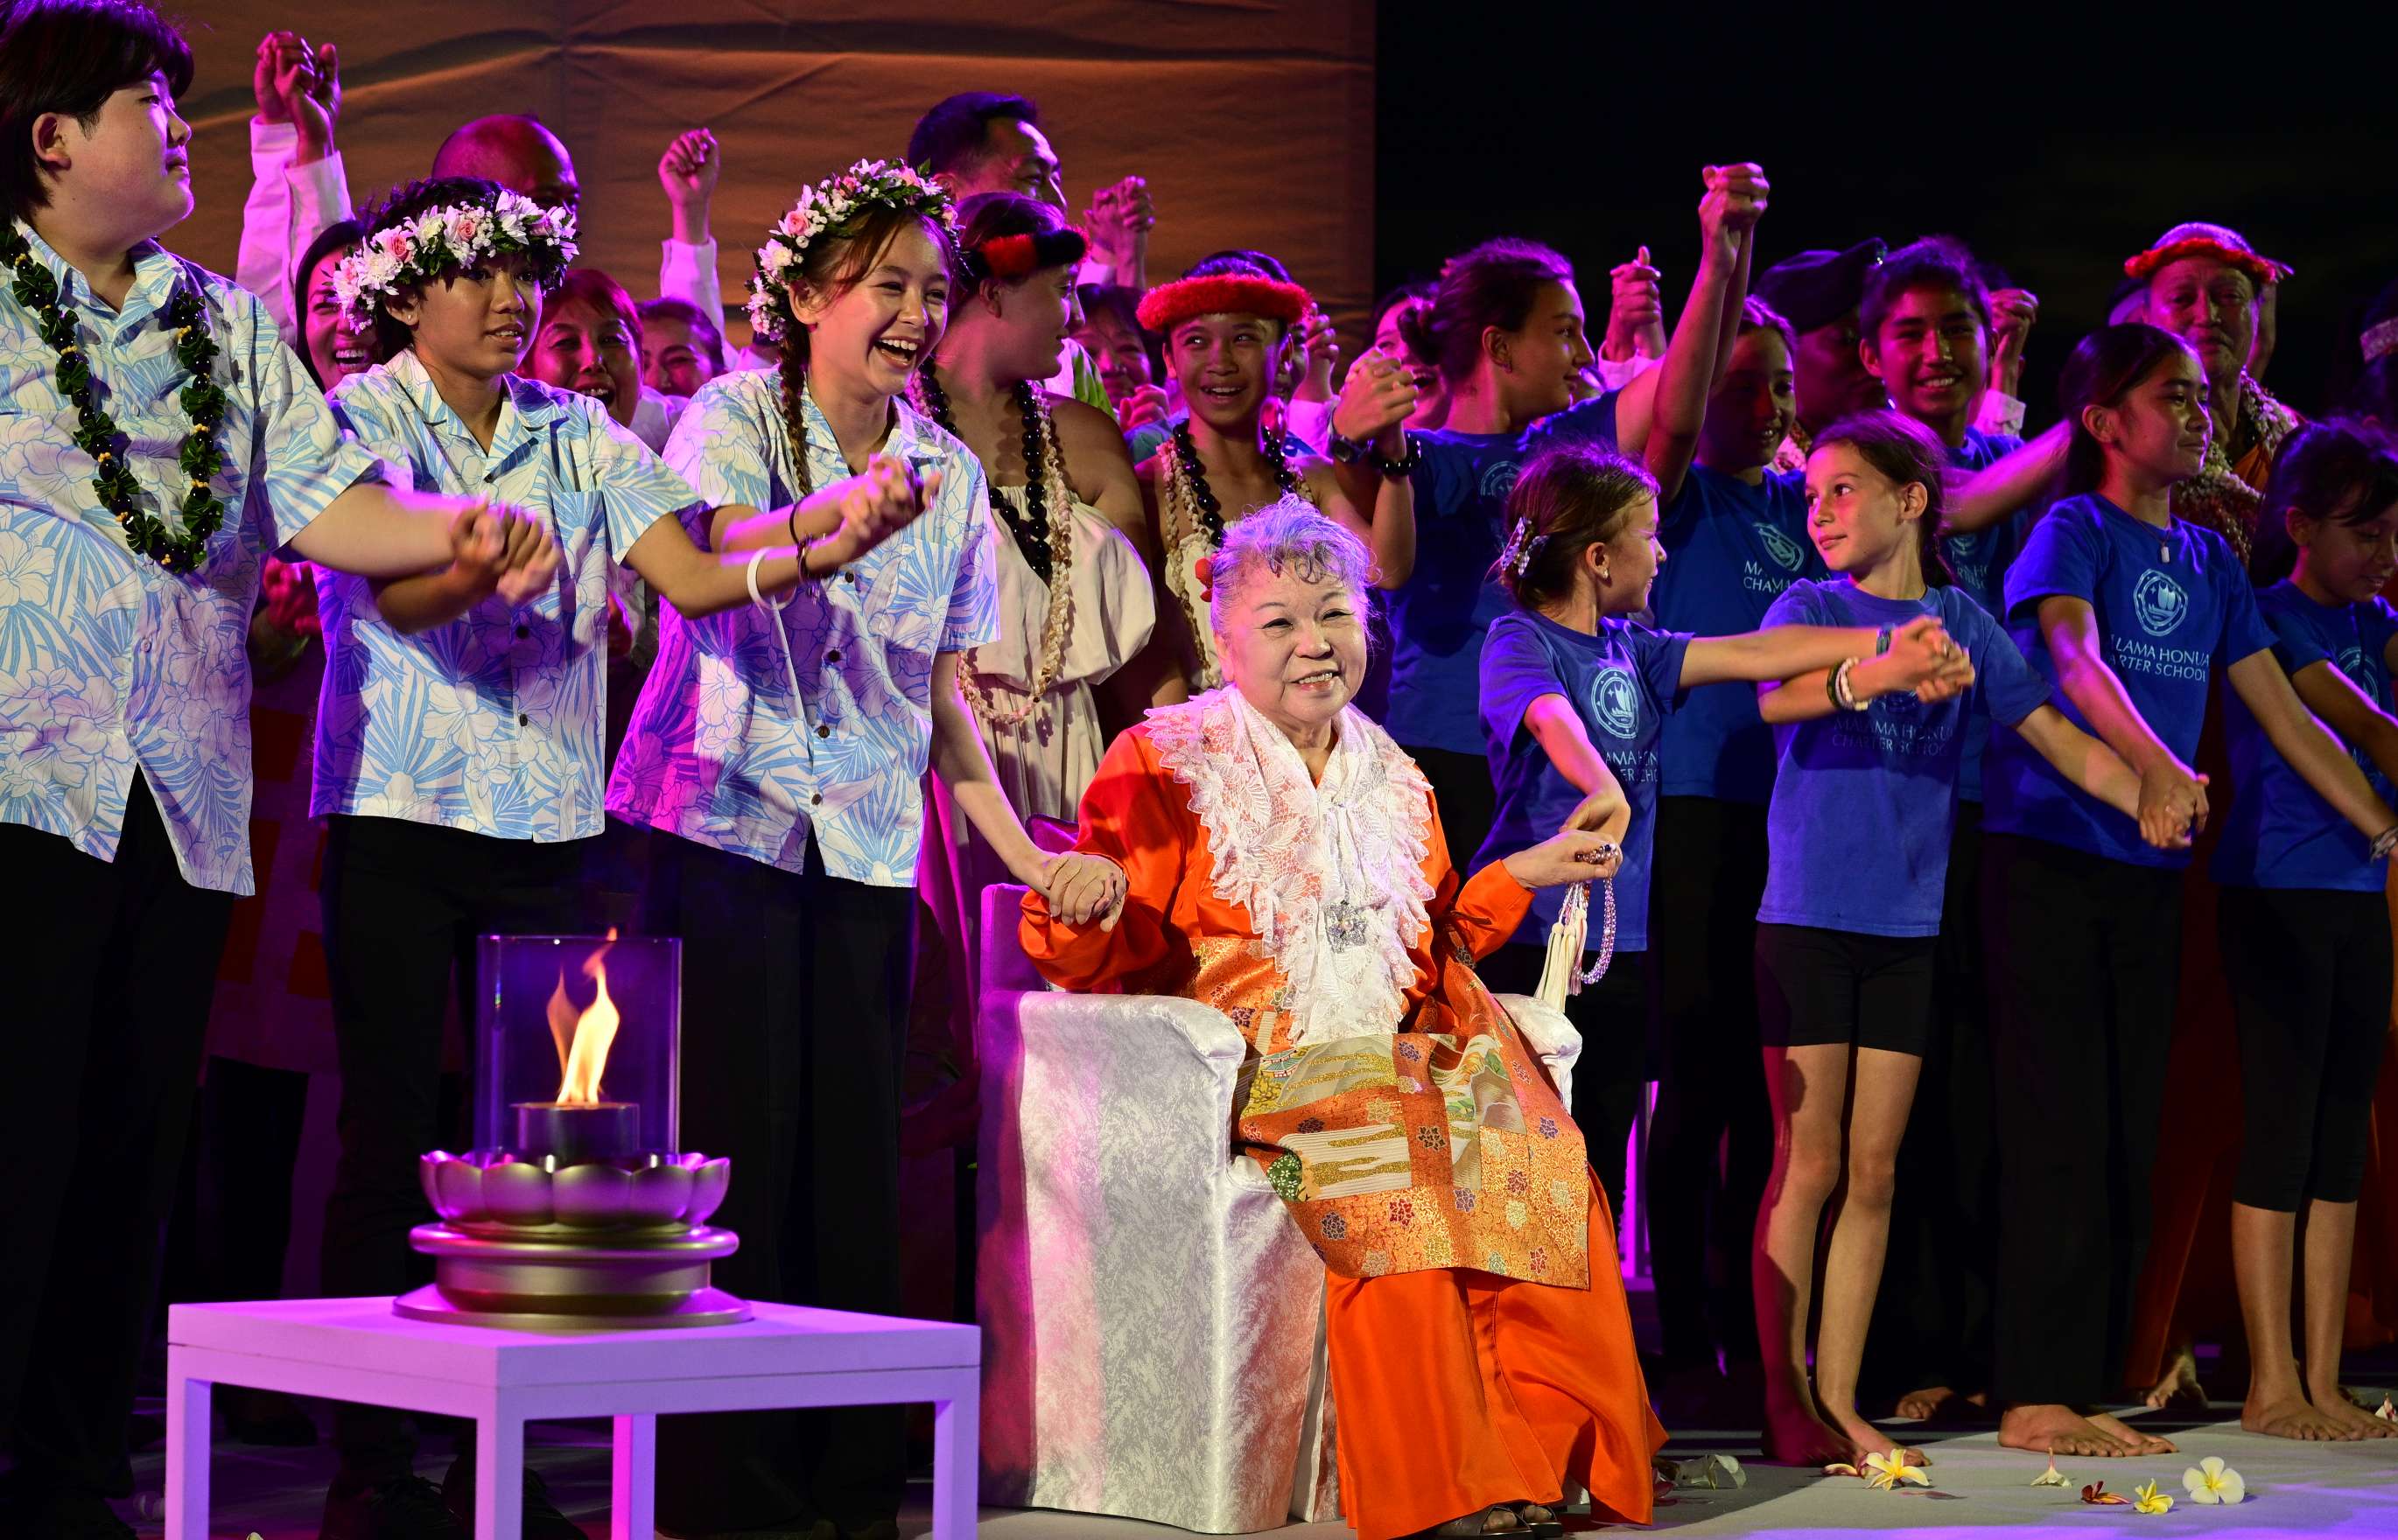 A smiling, elder Japanese woman, dressed in orange robes with a brocade apron and white shawl, sits on a chair under lights on a stage, holding hands with children and young-adults, who are all holding hands and joyfully smiling; a single open-flame lamp sits atop a lotus shaped base on a table in the foreground.